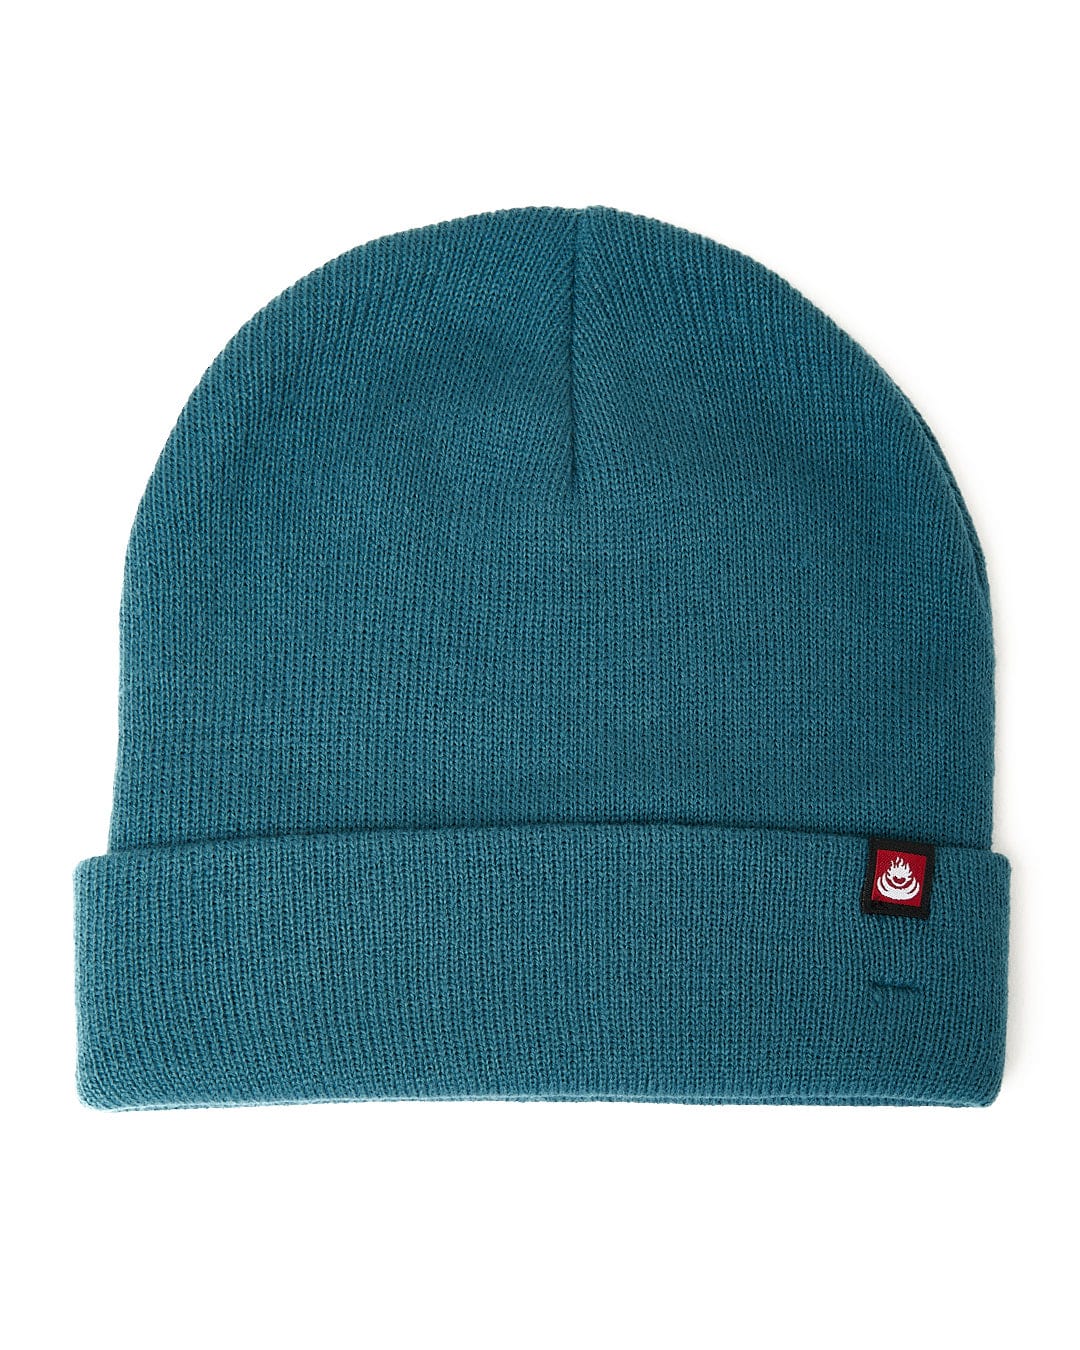 A Saltrock teal Tight Knit Beanie with a red logo on it.